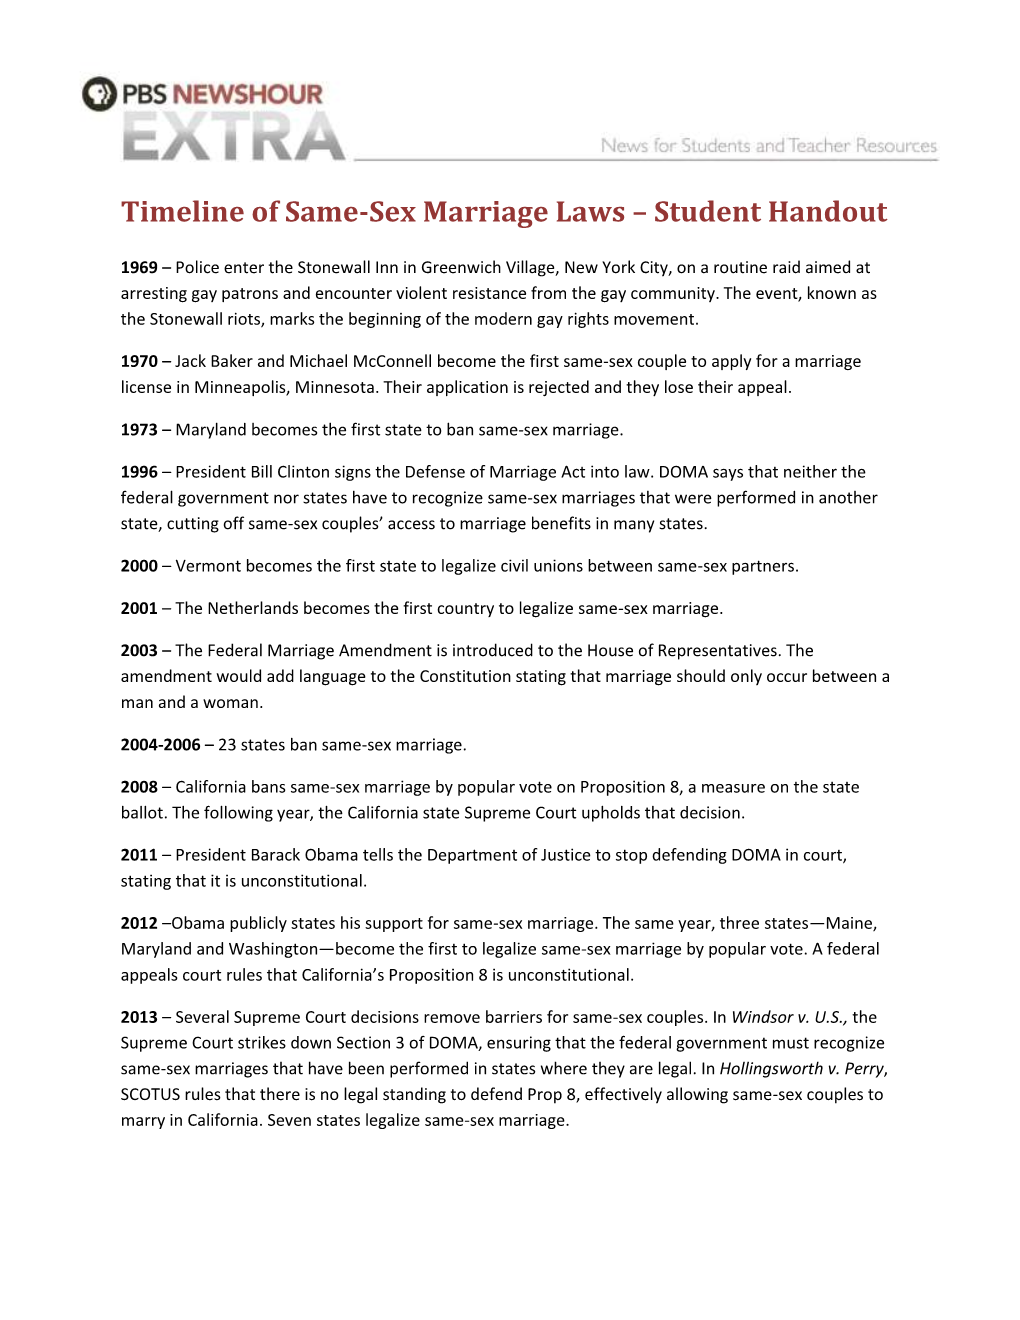 Timeline of Same-Sex Marriage Laws – Student Handout